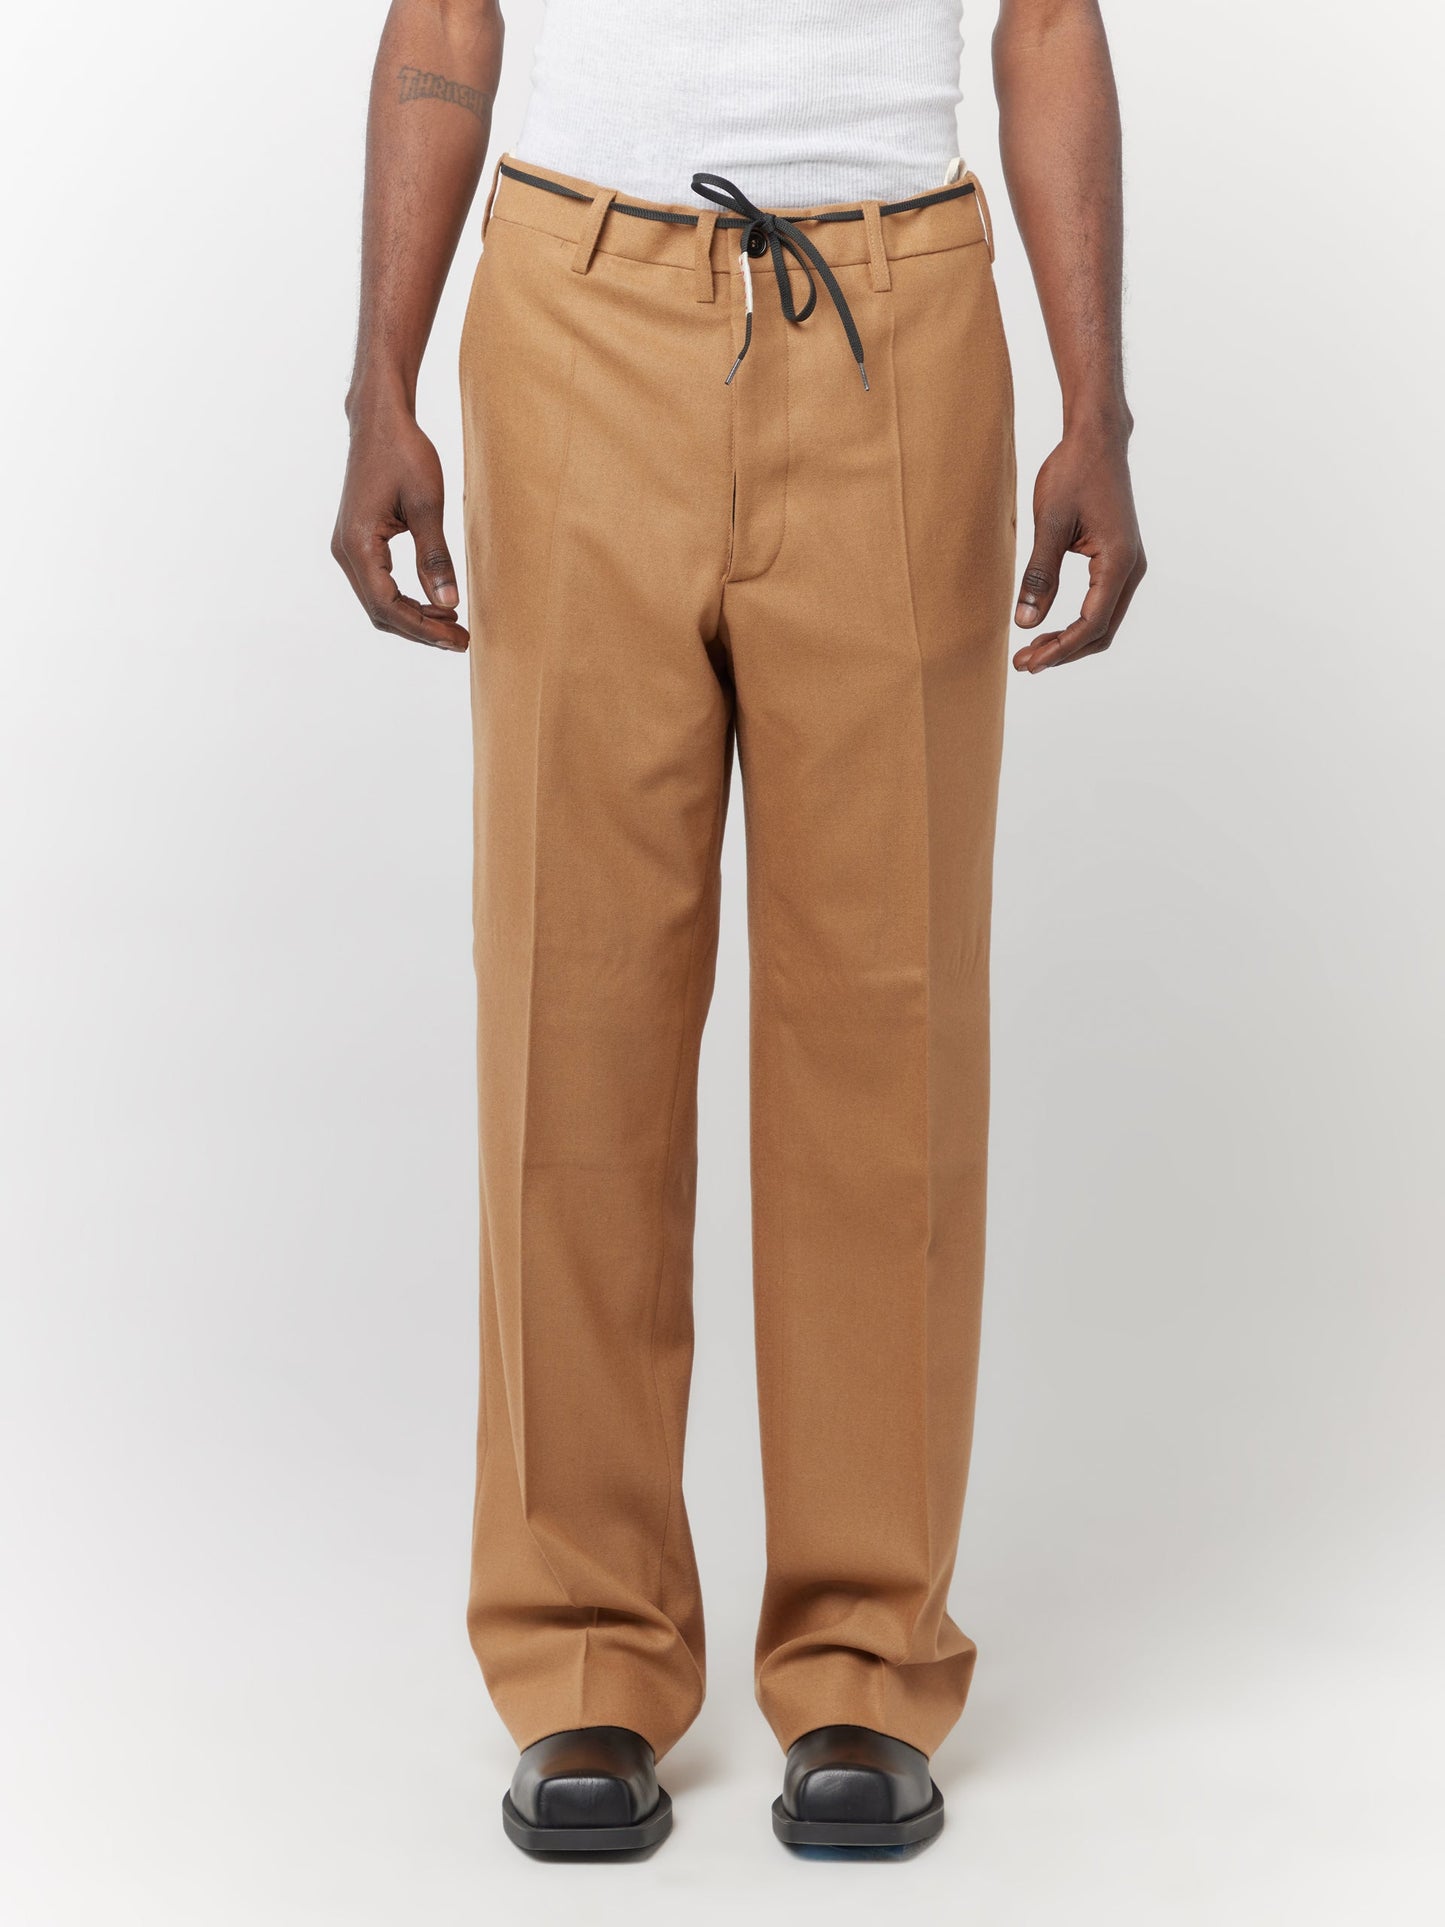 Buy Marni WOOL CHINO PANTS (Earth Of Siena) Online at UNION LOS ANGELES